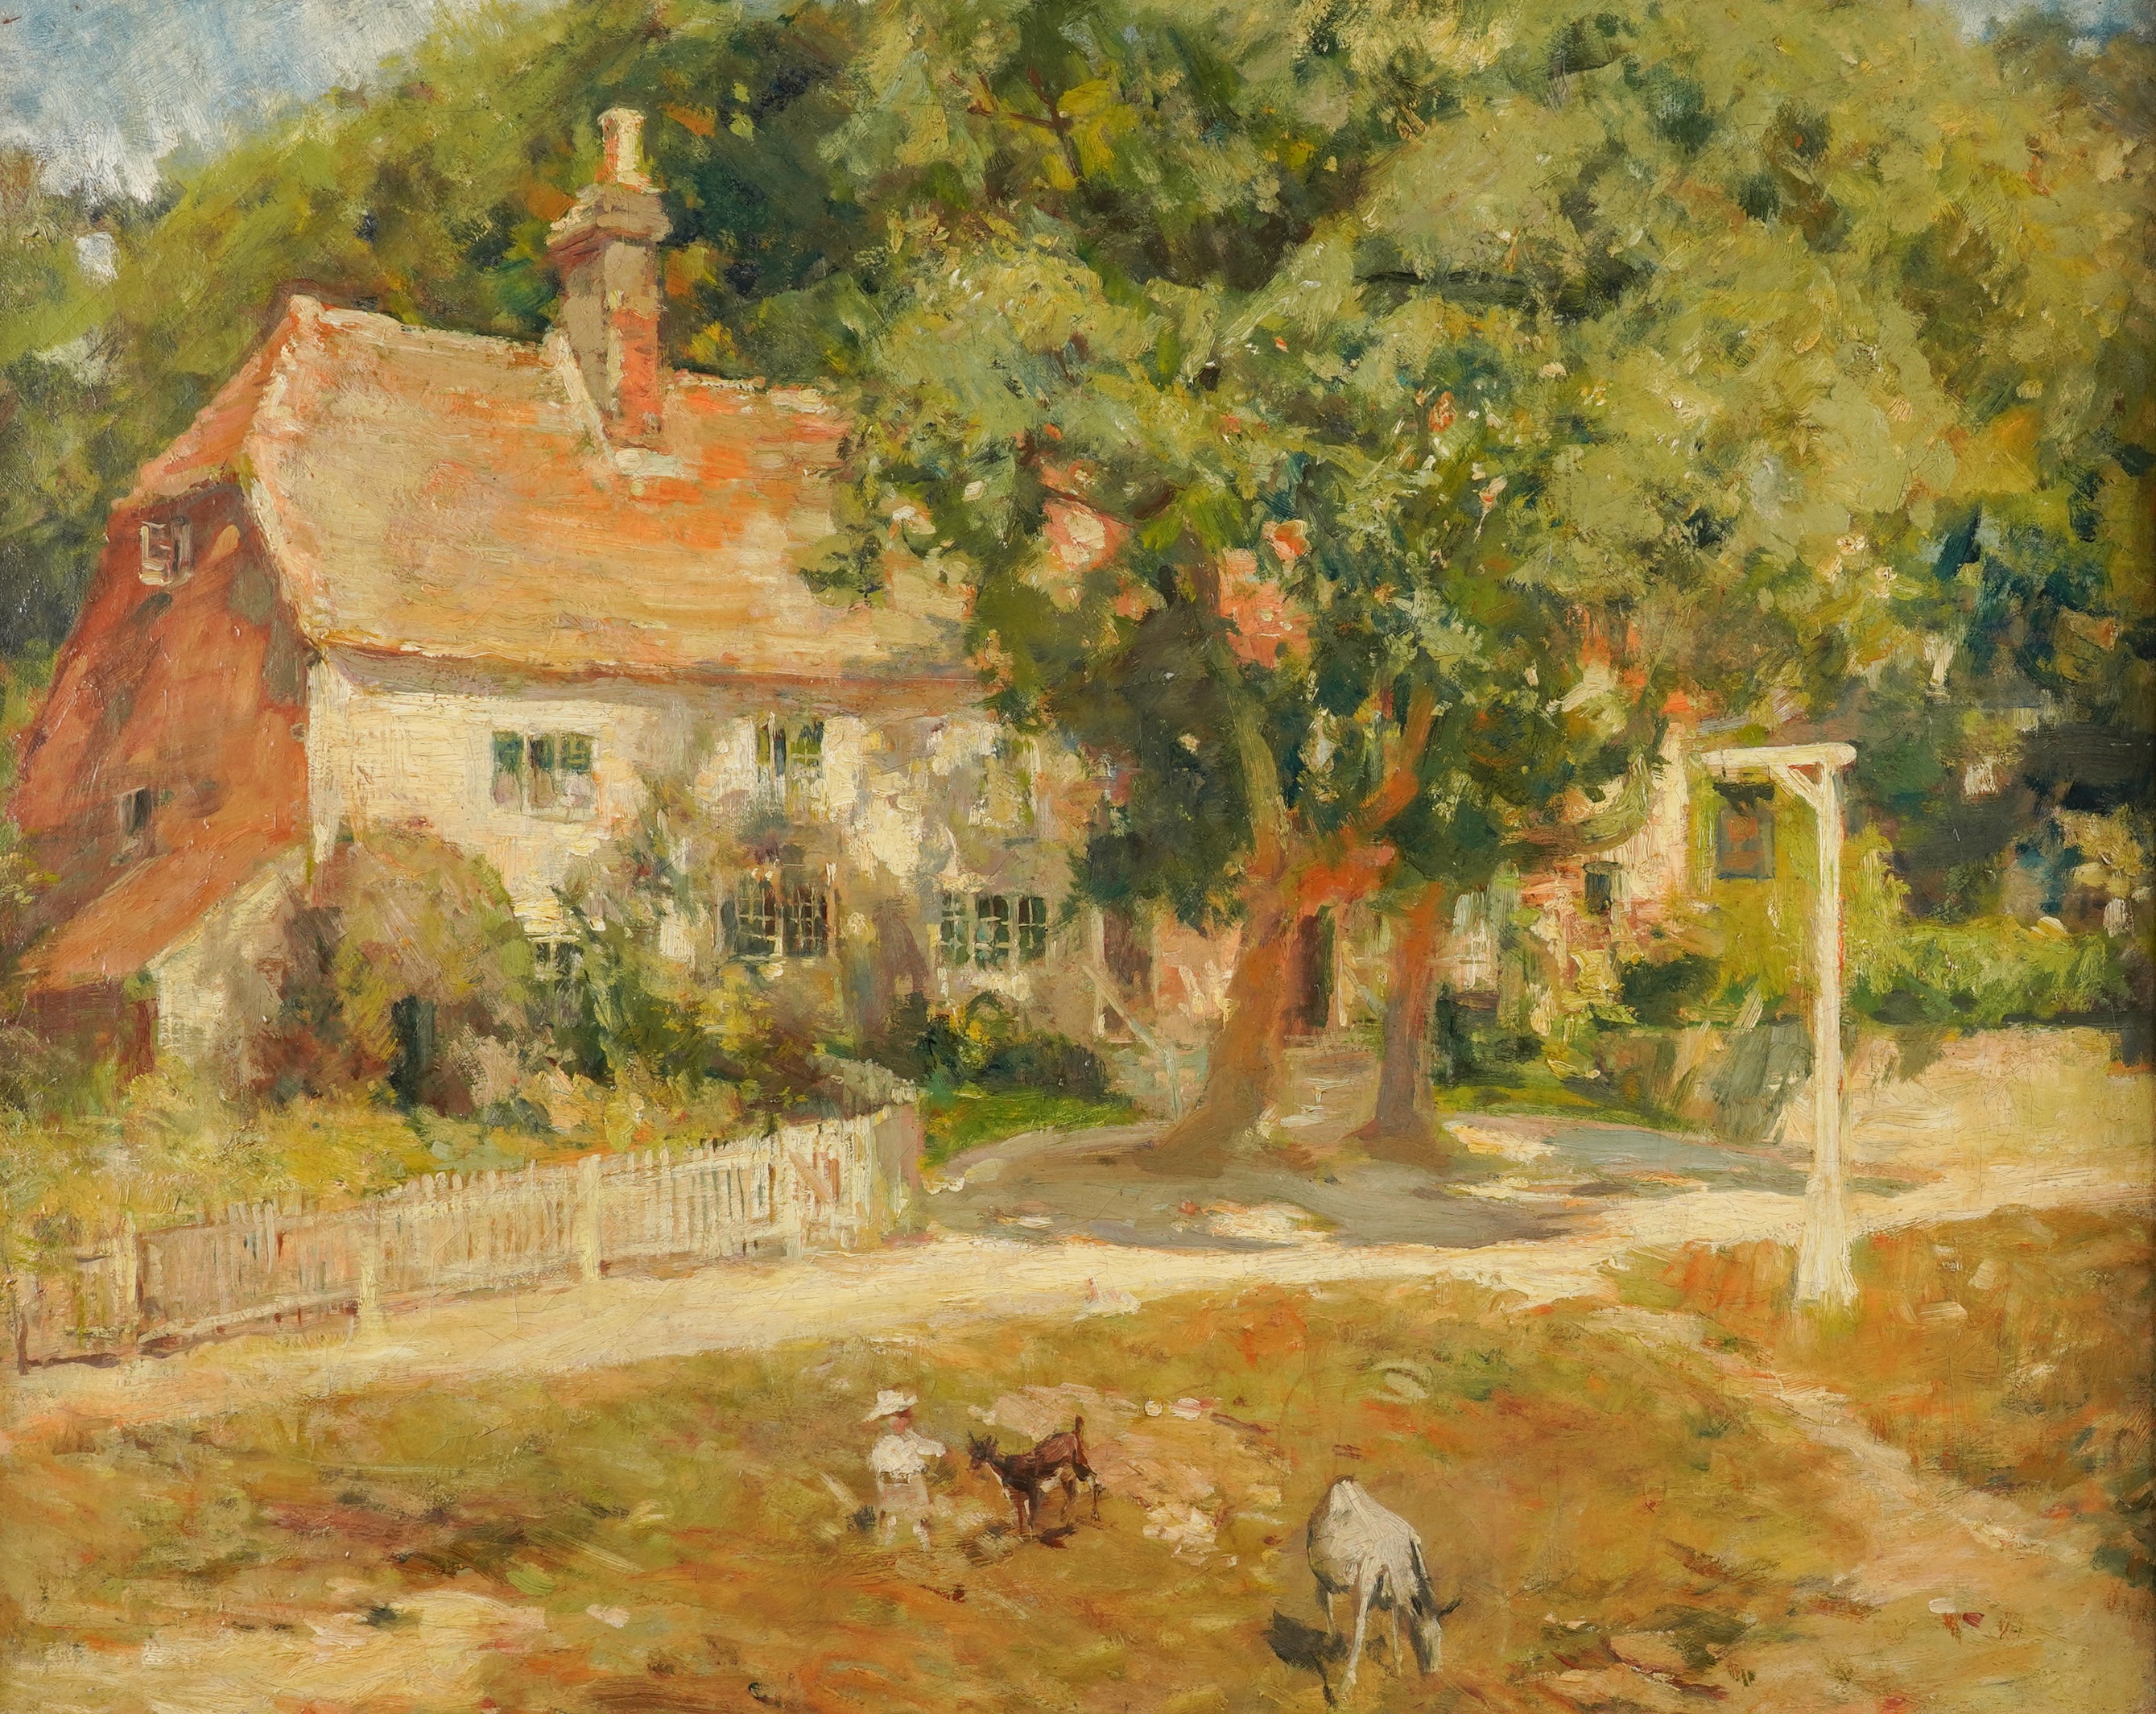 The Rose and Crown, Mayfield oil on canvas 63 x 76cm, Estimate: £700 - £1,000